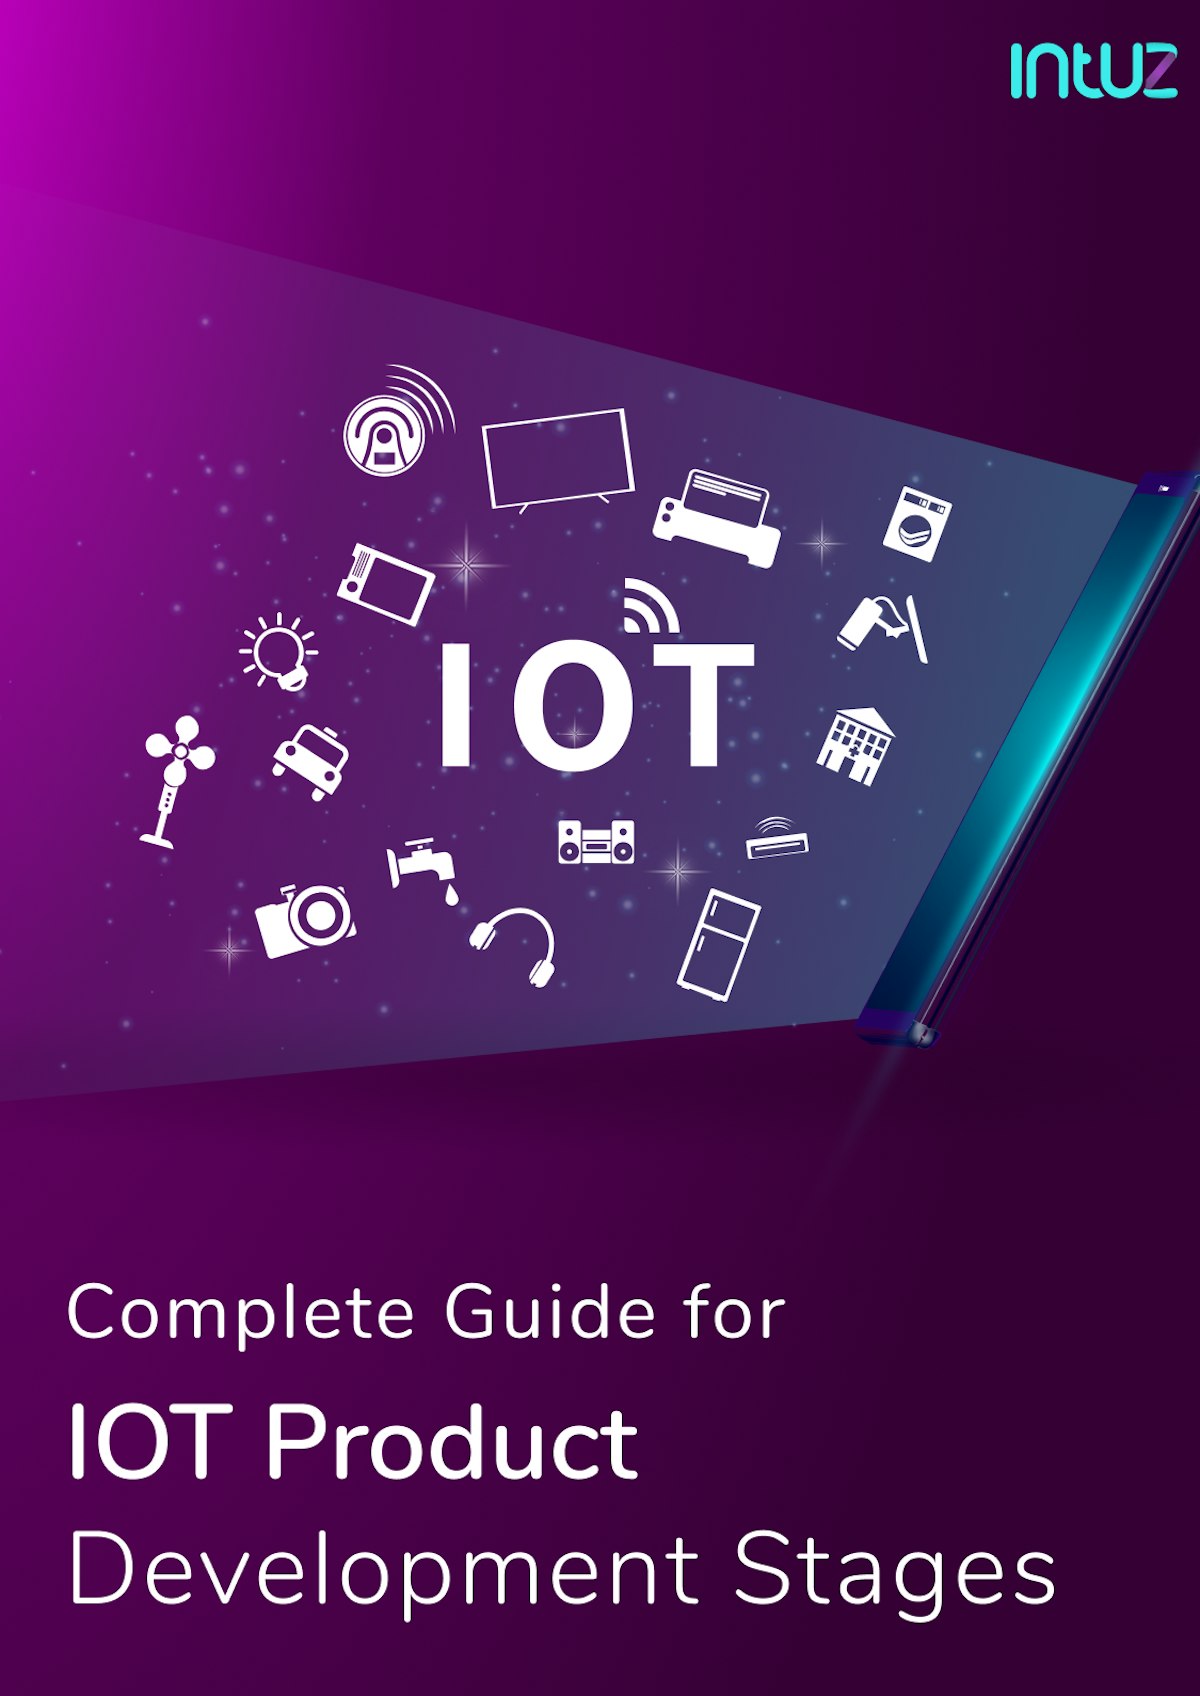 Guide - IoT Product Development Guide